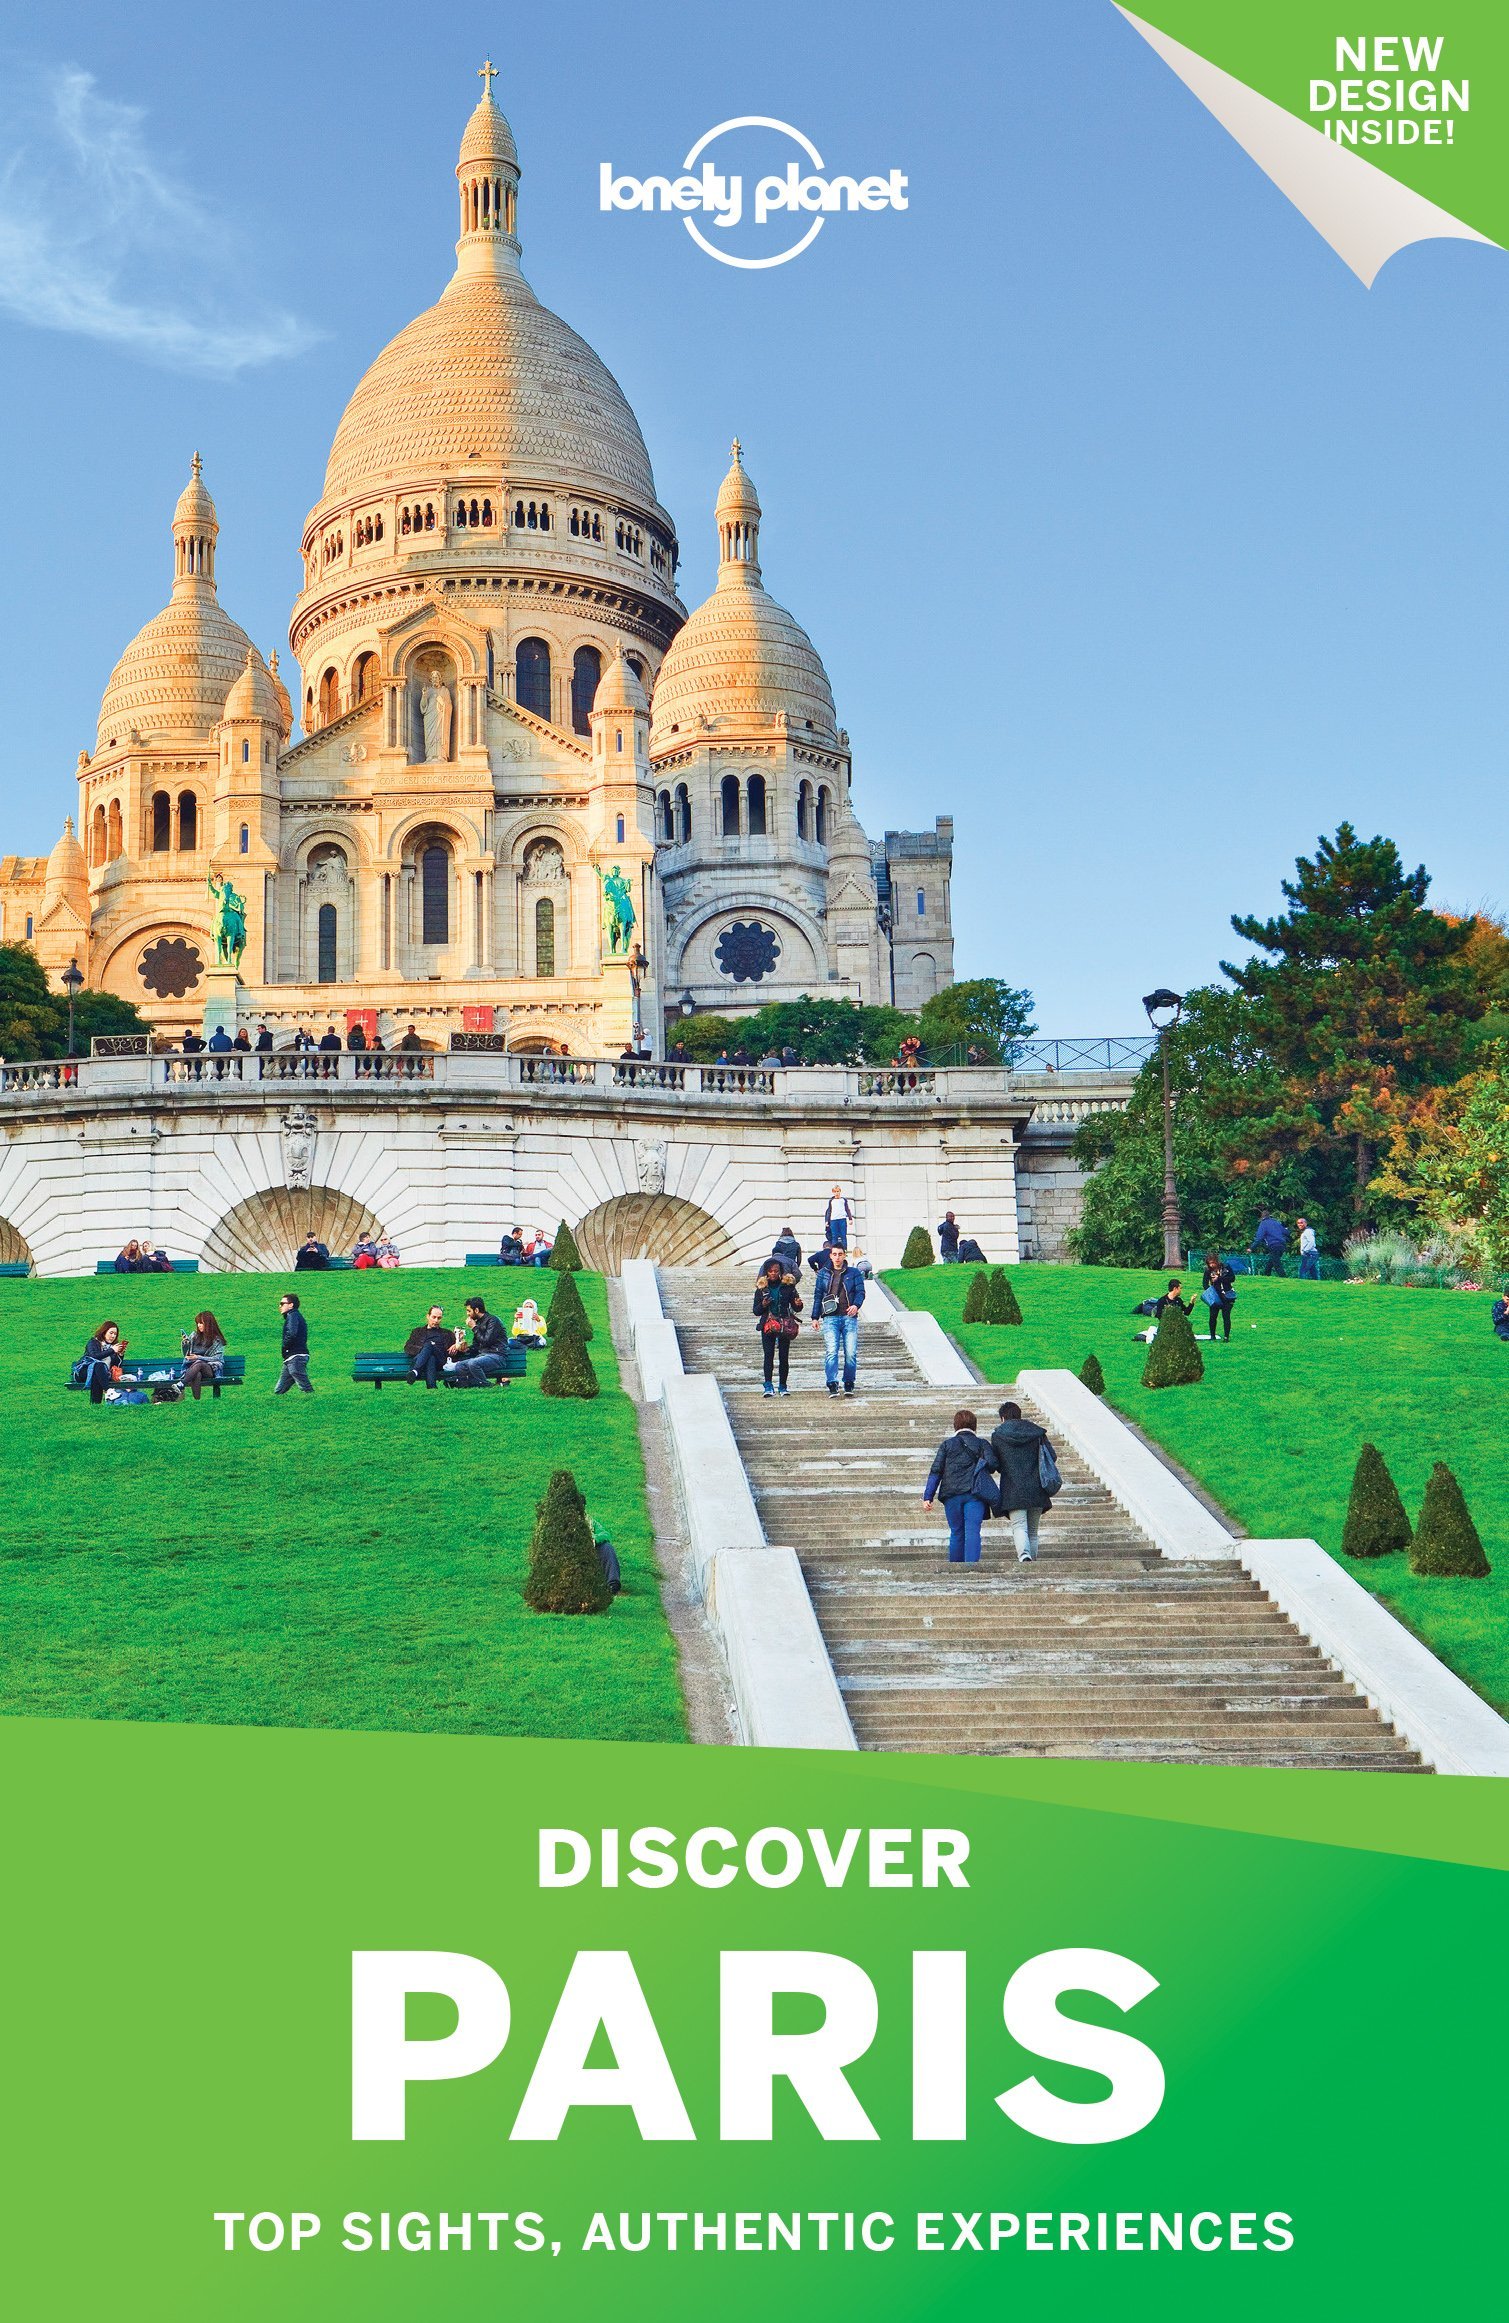 Download Lonely Planet Discover Paris 2017 (Travel Guide) - SoftArchive